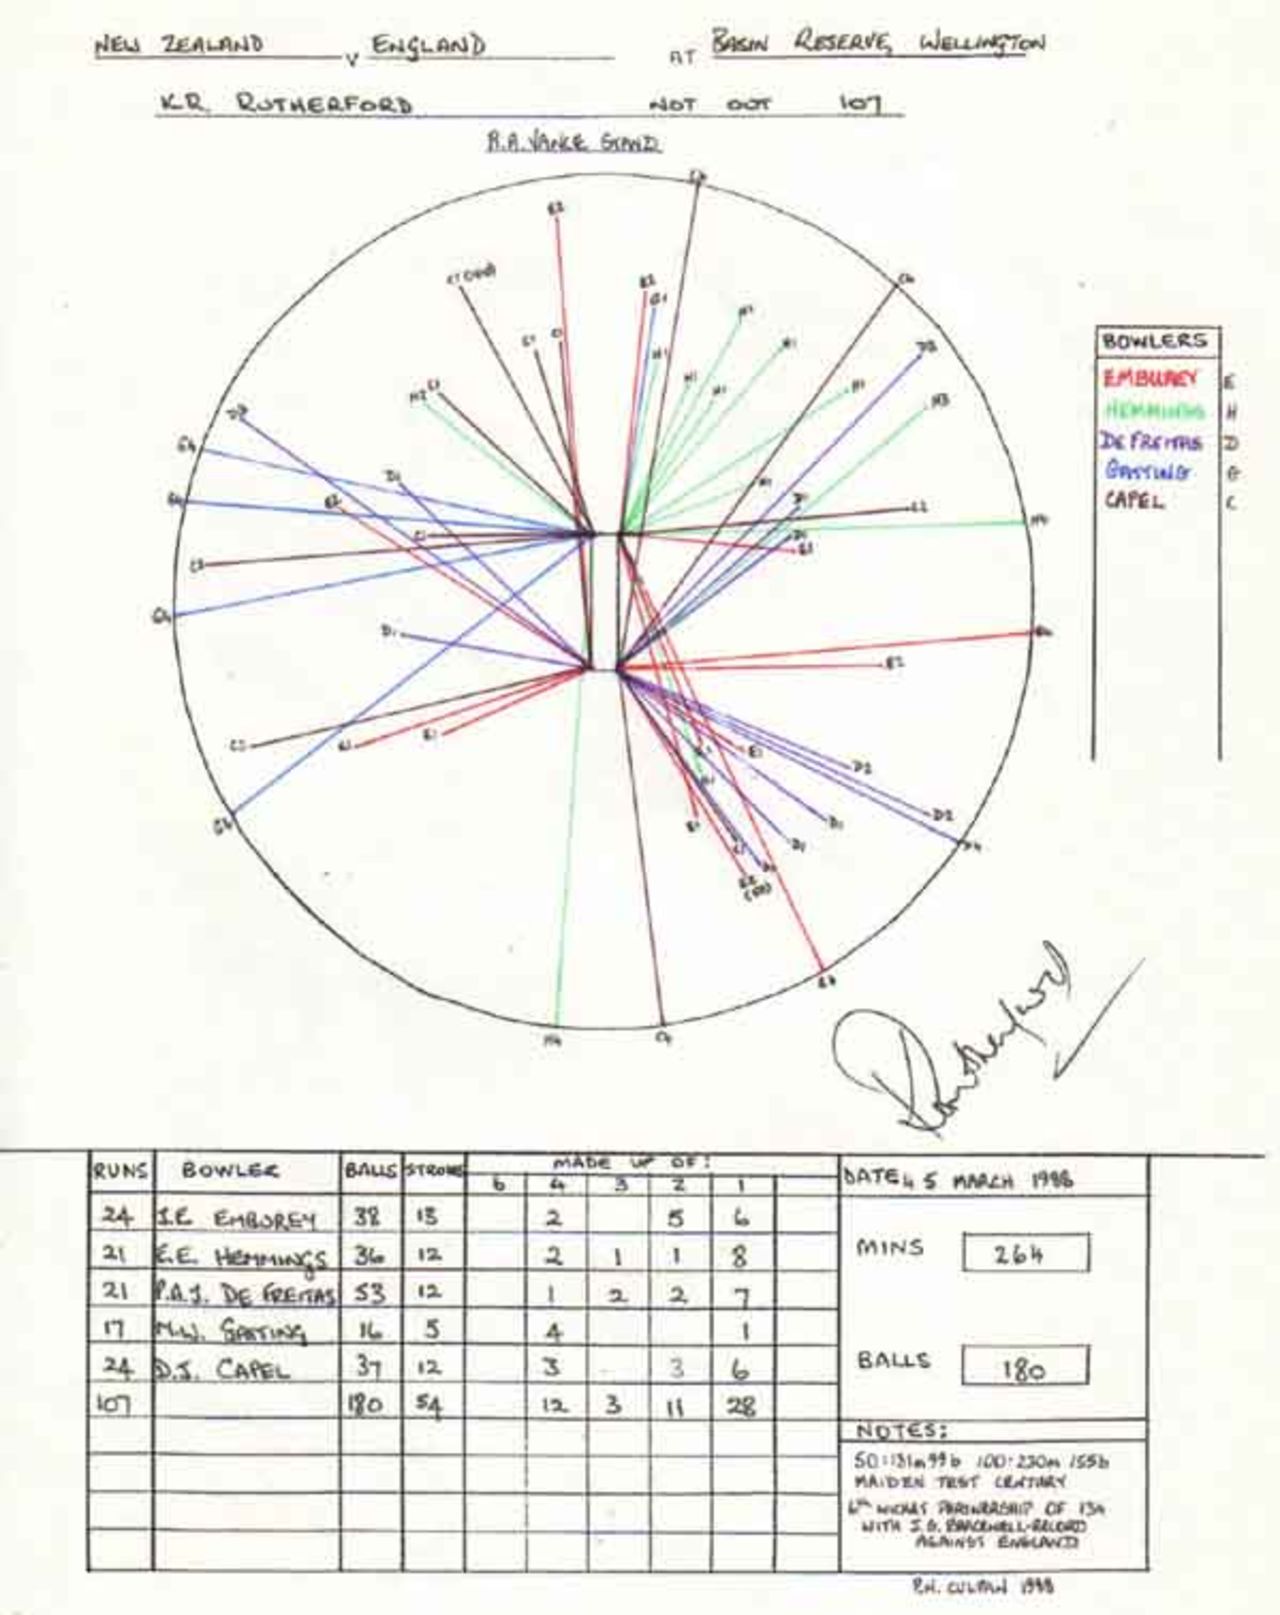 Wagon Wheel of Ken Rutherford's 107 v England, Wellington 4-5 March 1988